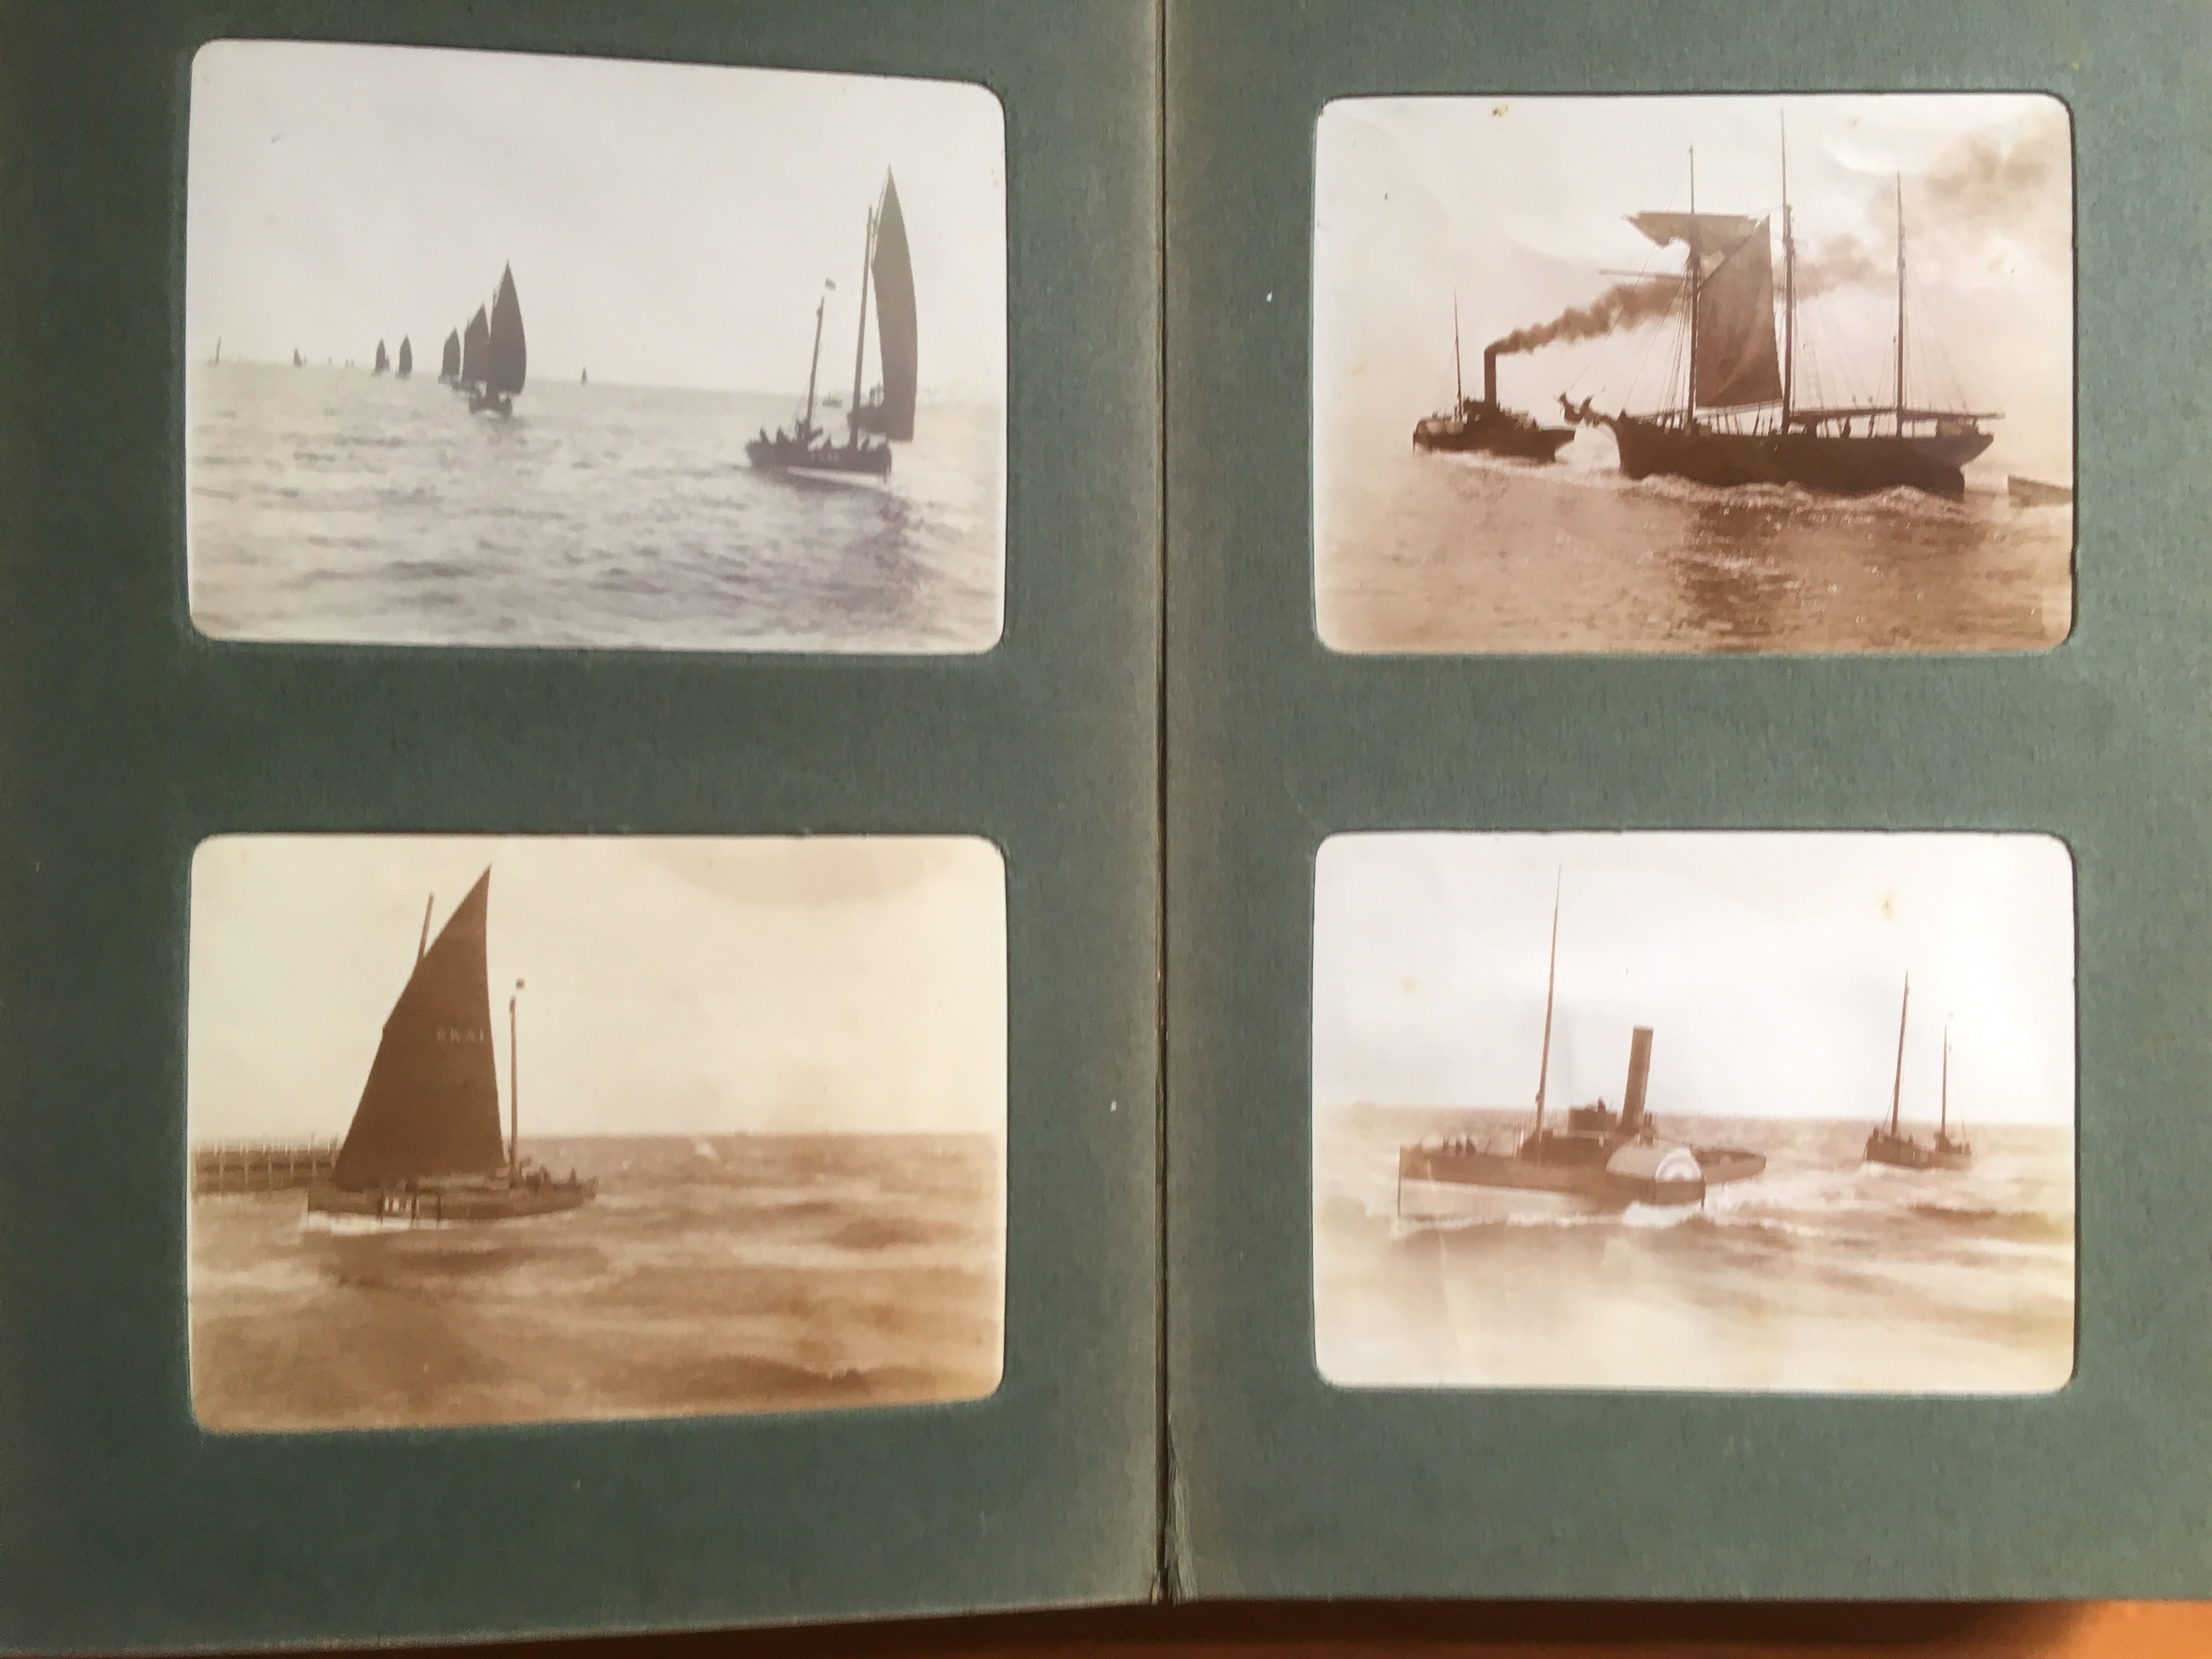 VICTORIAN PHOTOGRAPH ALBUM WITH MAINLY GREAT YARMOUTH AREA IMAGES TOGETHER WITH A SMALL ALBUM OF - Image 10 of 11